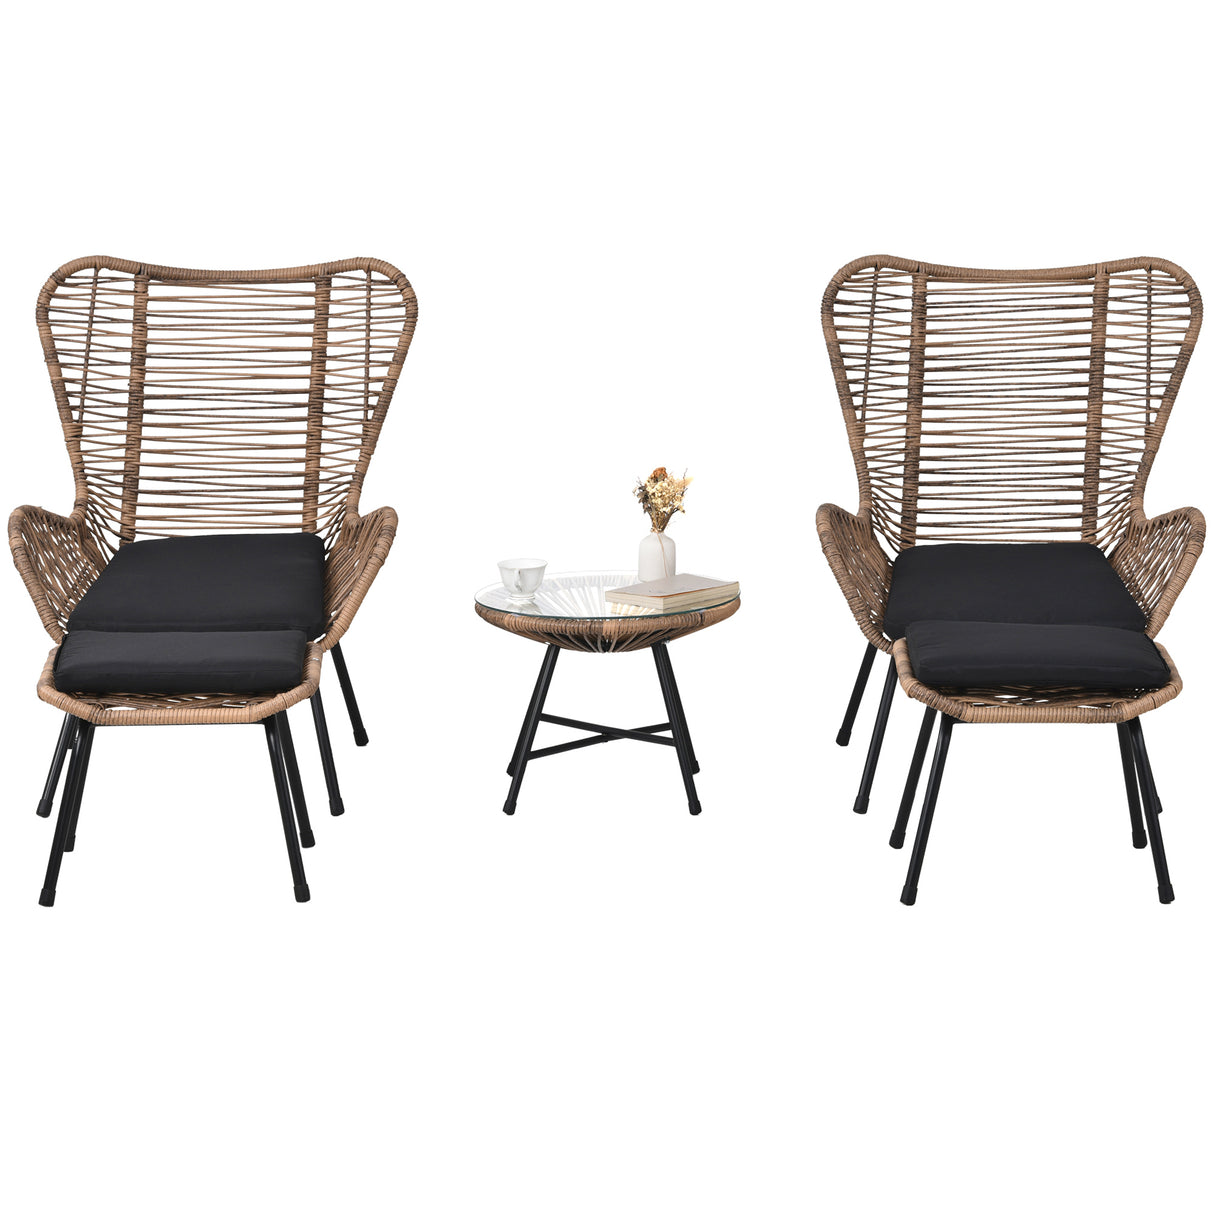 TOPMAX Outdoor Patio 5-Piece Rattan Conversation Set, PE Wicker Arm Chairs with Stools and Tempered Glass Tea Table for Balcony, Natural Rattan+Dark Gray